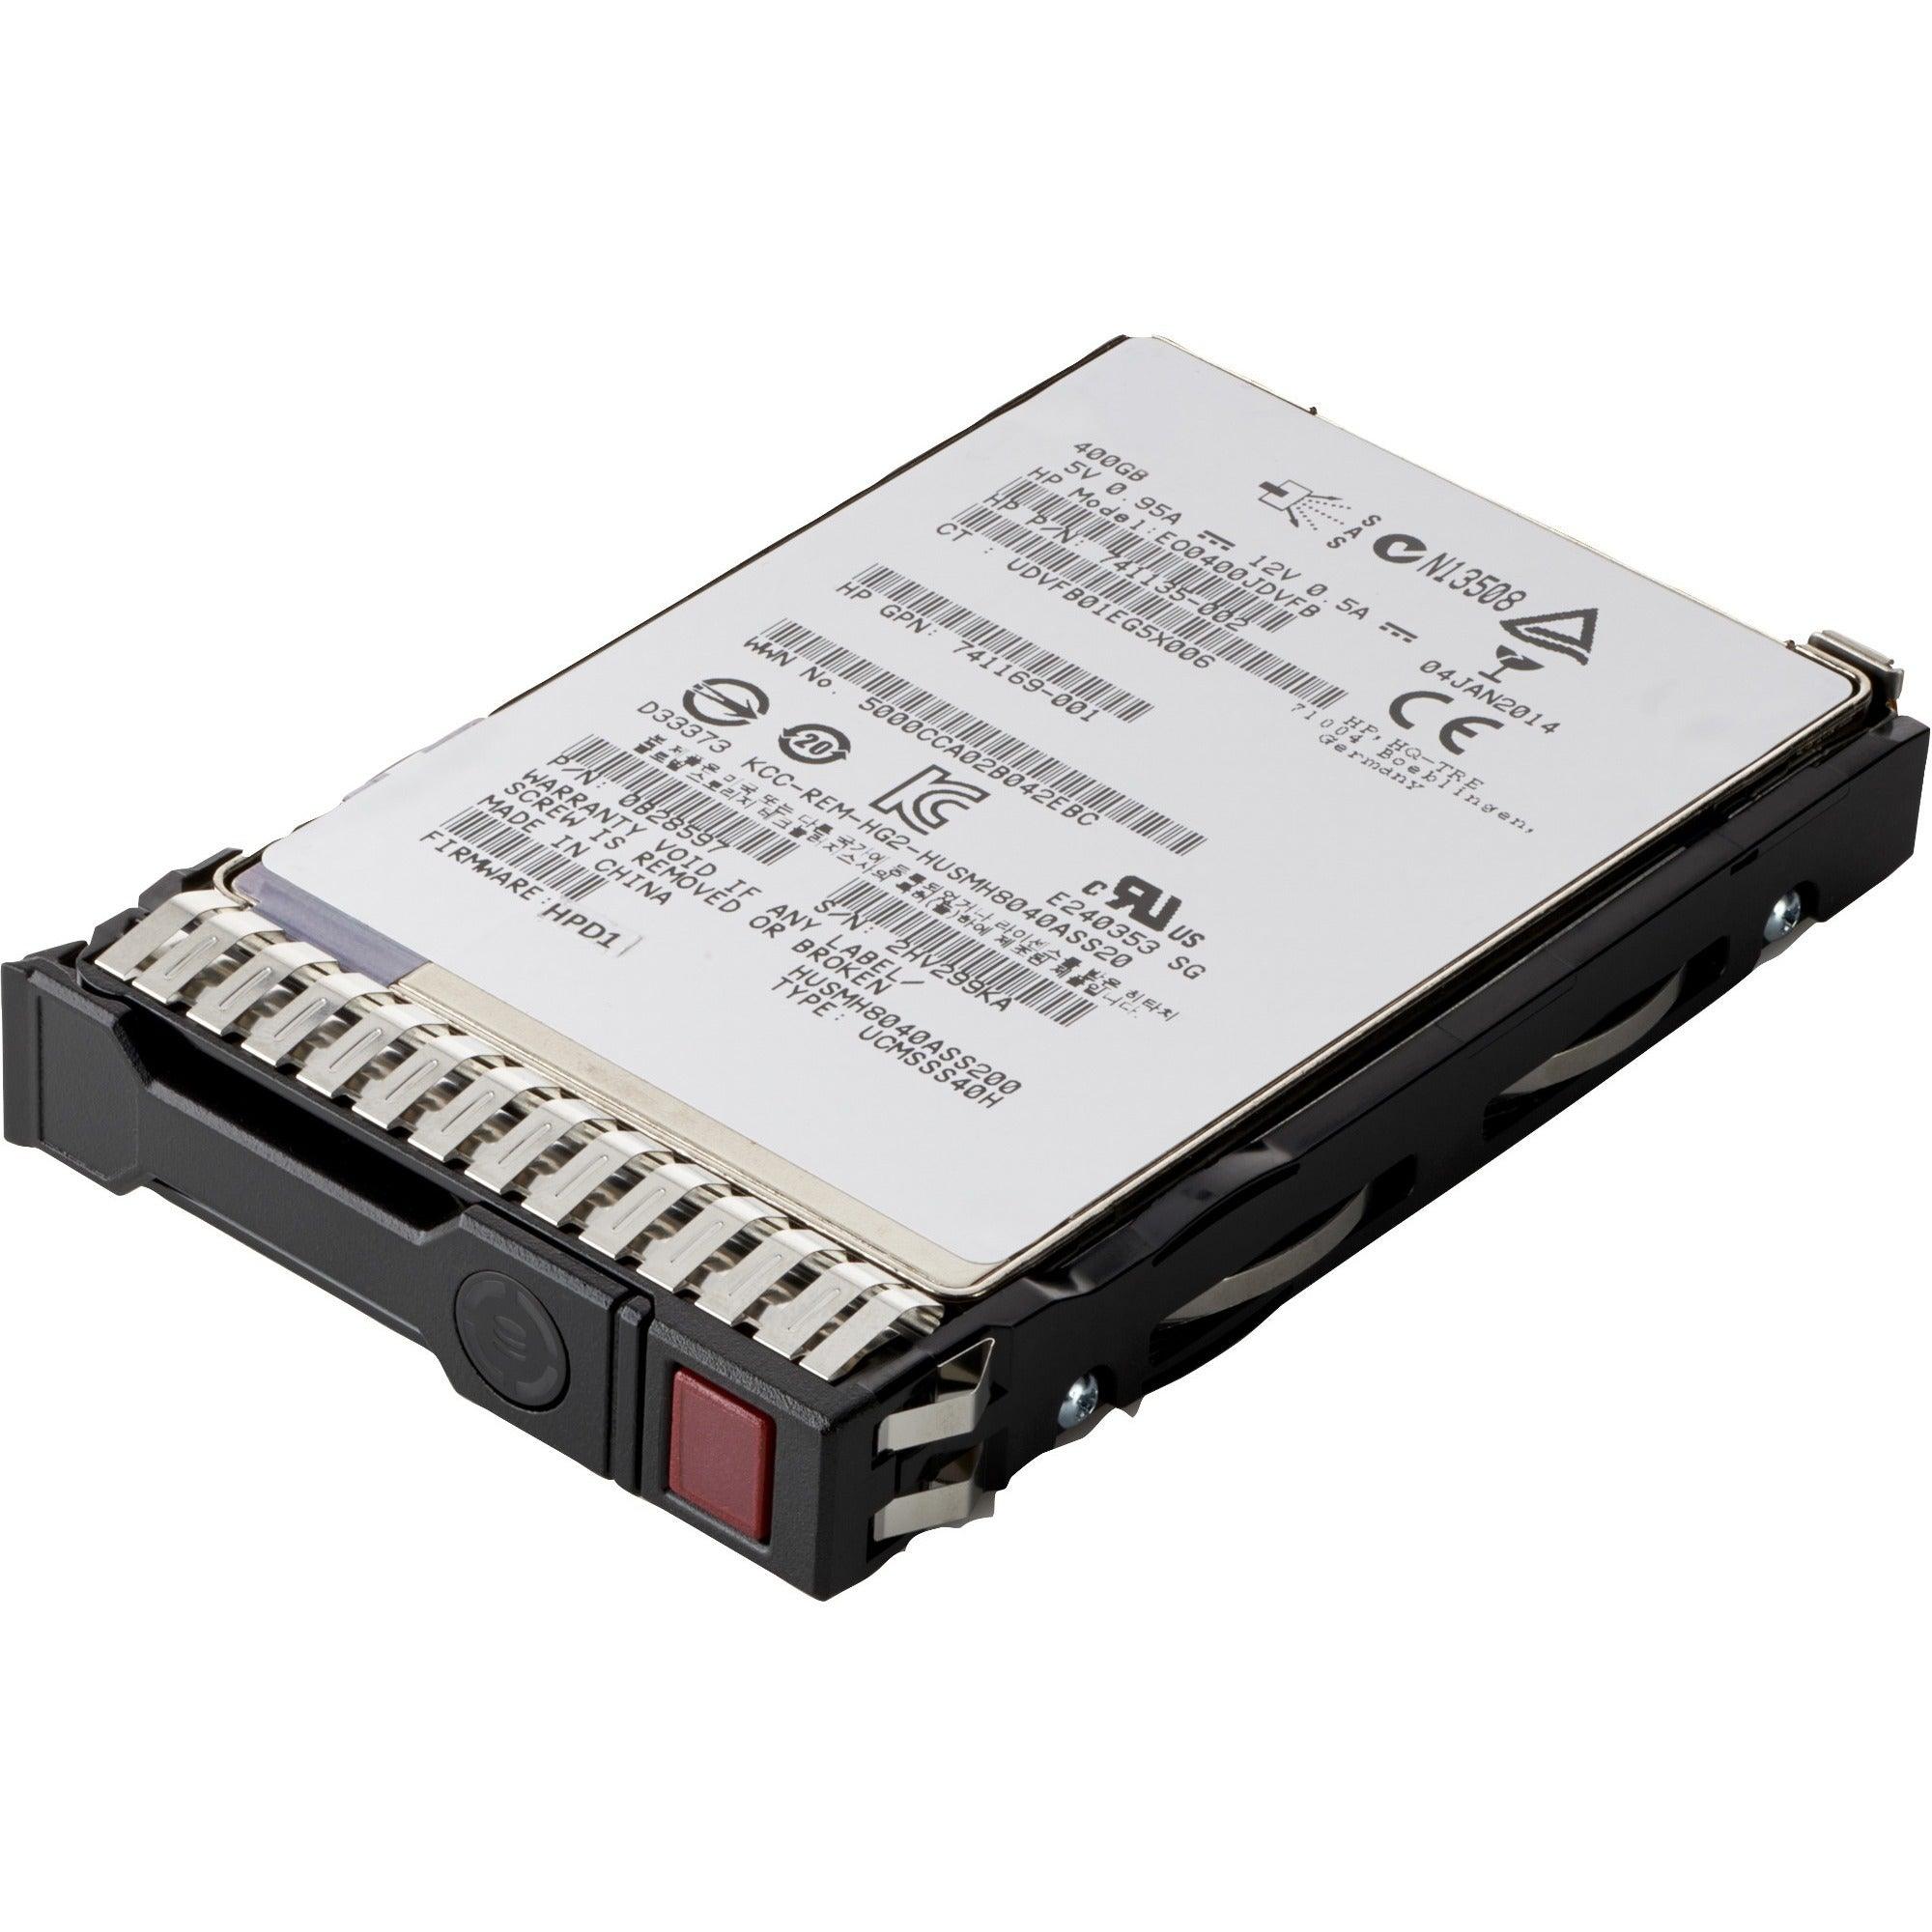 HPE 480GB SATA 6G Mixed Use SFF (2.5in) SC SSD P09712-B21